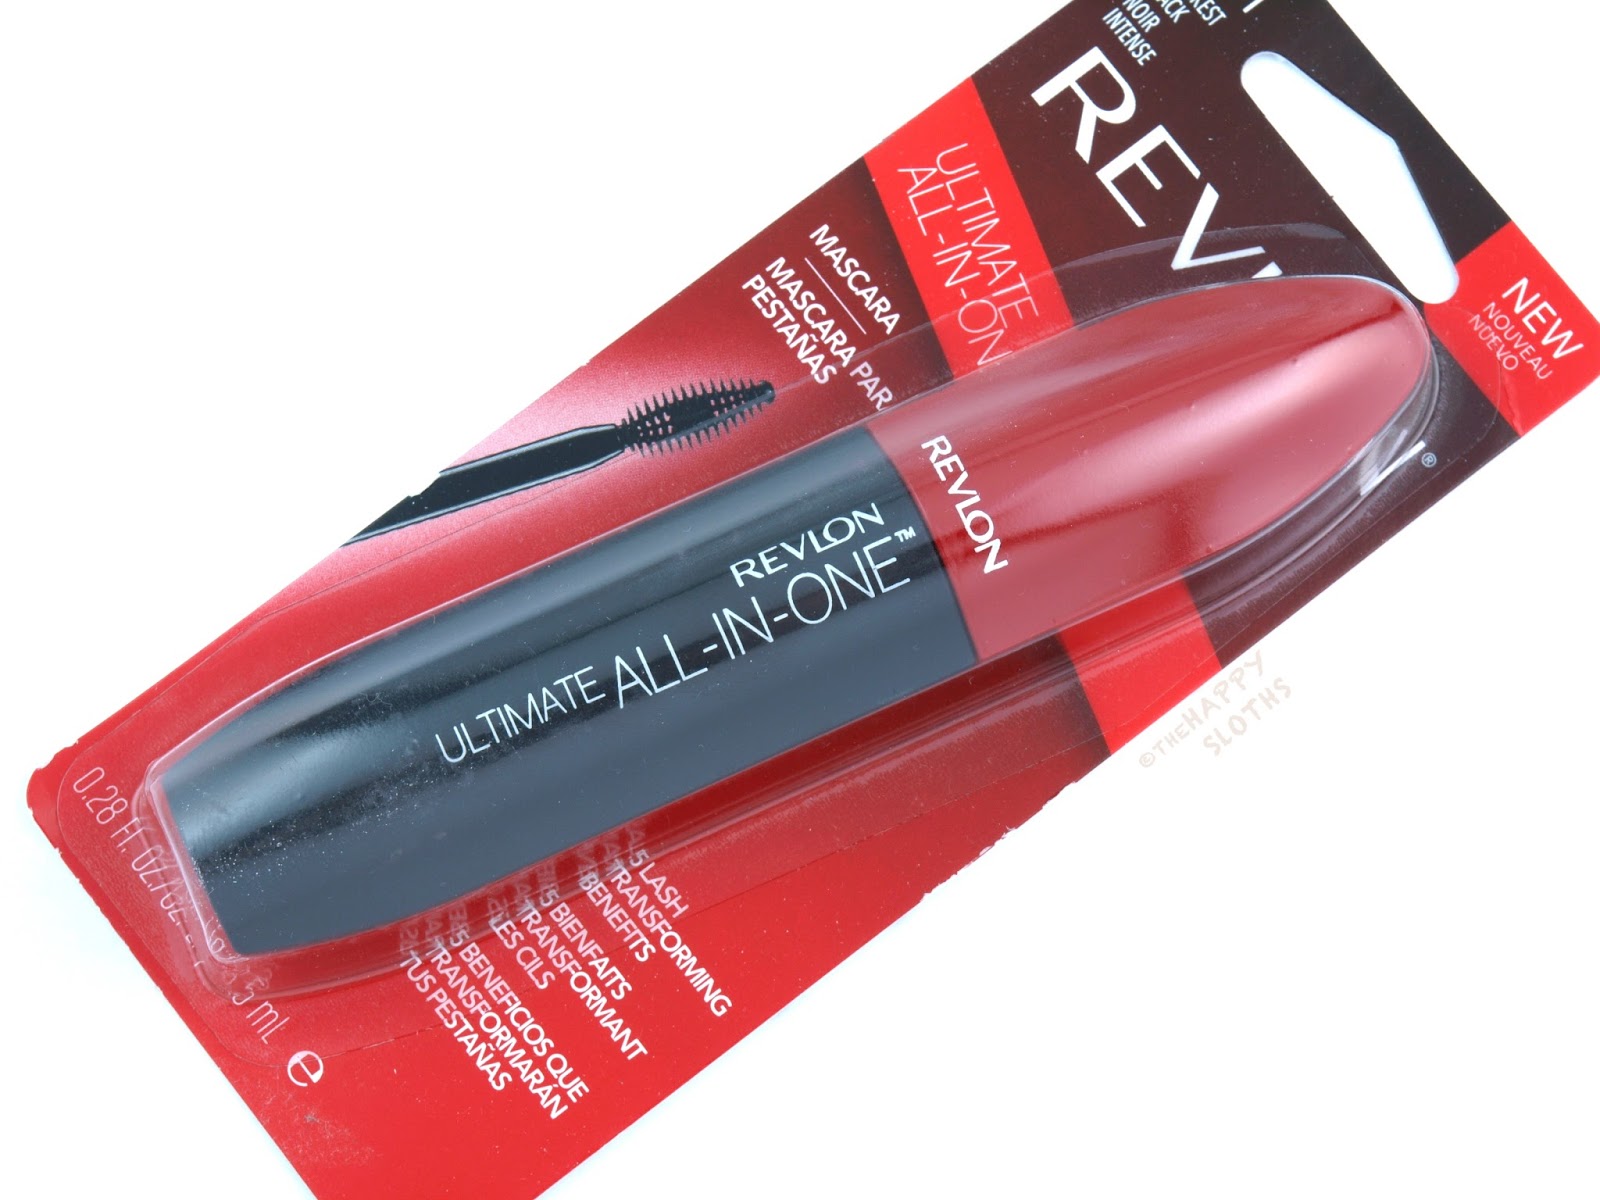 personale smække indsats Revlon Ultimate All-In-One Mascara: Review and Swatches | The Happy Sloths:  Beauty, Makeup, and Skincare Blog with Reviews and Swatches